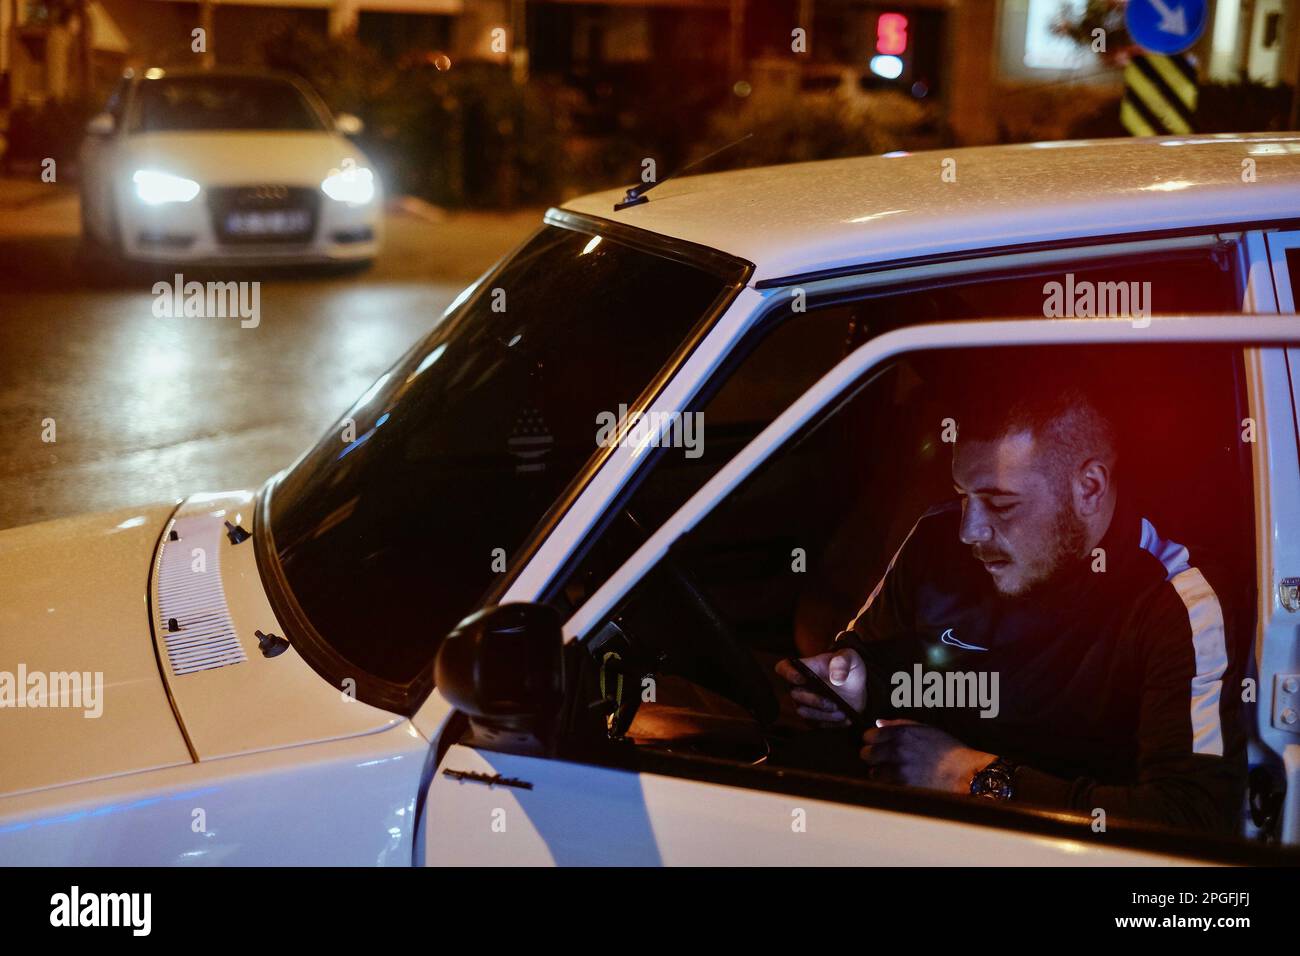 Izmir, Izmir, Turkiye. 22nd Mar, 2023. These vehicles, which are the stars of the 90s from subculture to families, are still a symbol of expression and rebellion, as well as being a vehicle for some members of the society in Turkey''¦ Mr Oguz; the young person in the photo, loves his vehicle very much. He cleans it every evening after daily use in Bornova district of Izmir''¦ The Tofas Murat 131, Sahin, Dogan, and Kartal are Turkish versions of the old Fiat 131 (older models) automobile made in the Turk Otomobil Fabrikasi A.S. factory in Bursa, Turkey. While dogan means ''falcon'' in Turkish, Stock Photo